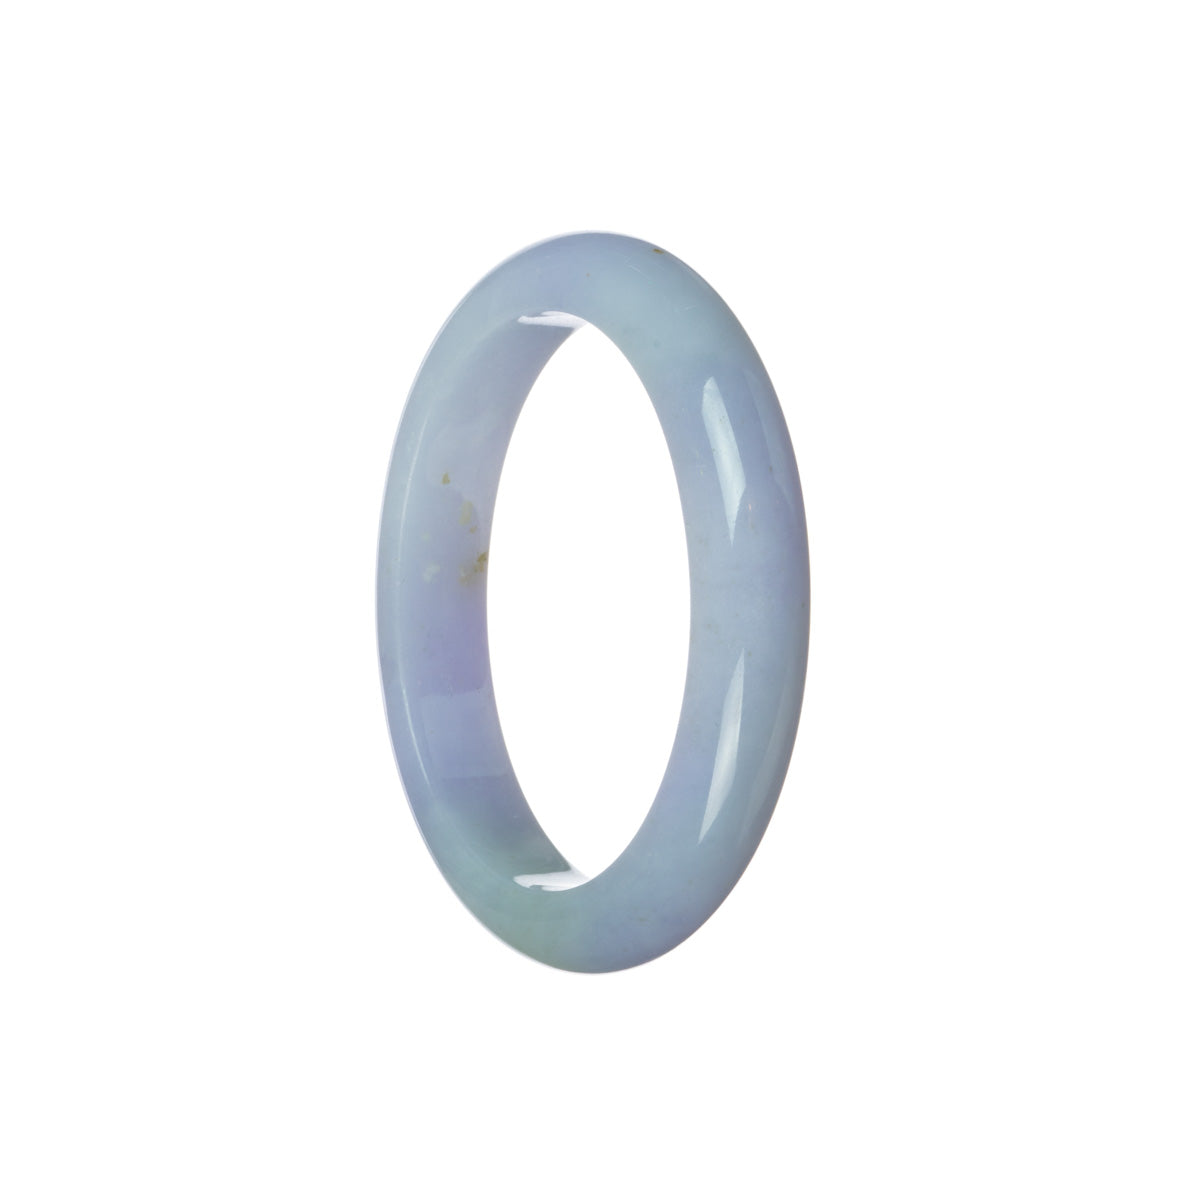 A lavender-colored jade bangle bracelet with a traditional design, measuring 50mm in an oval shape.